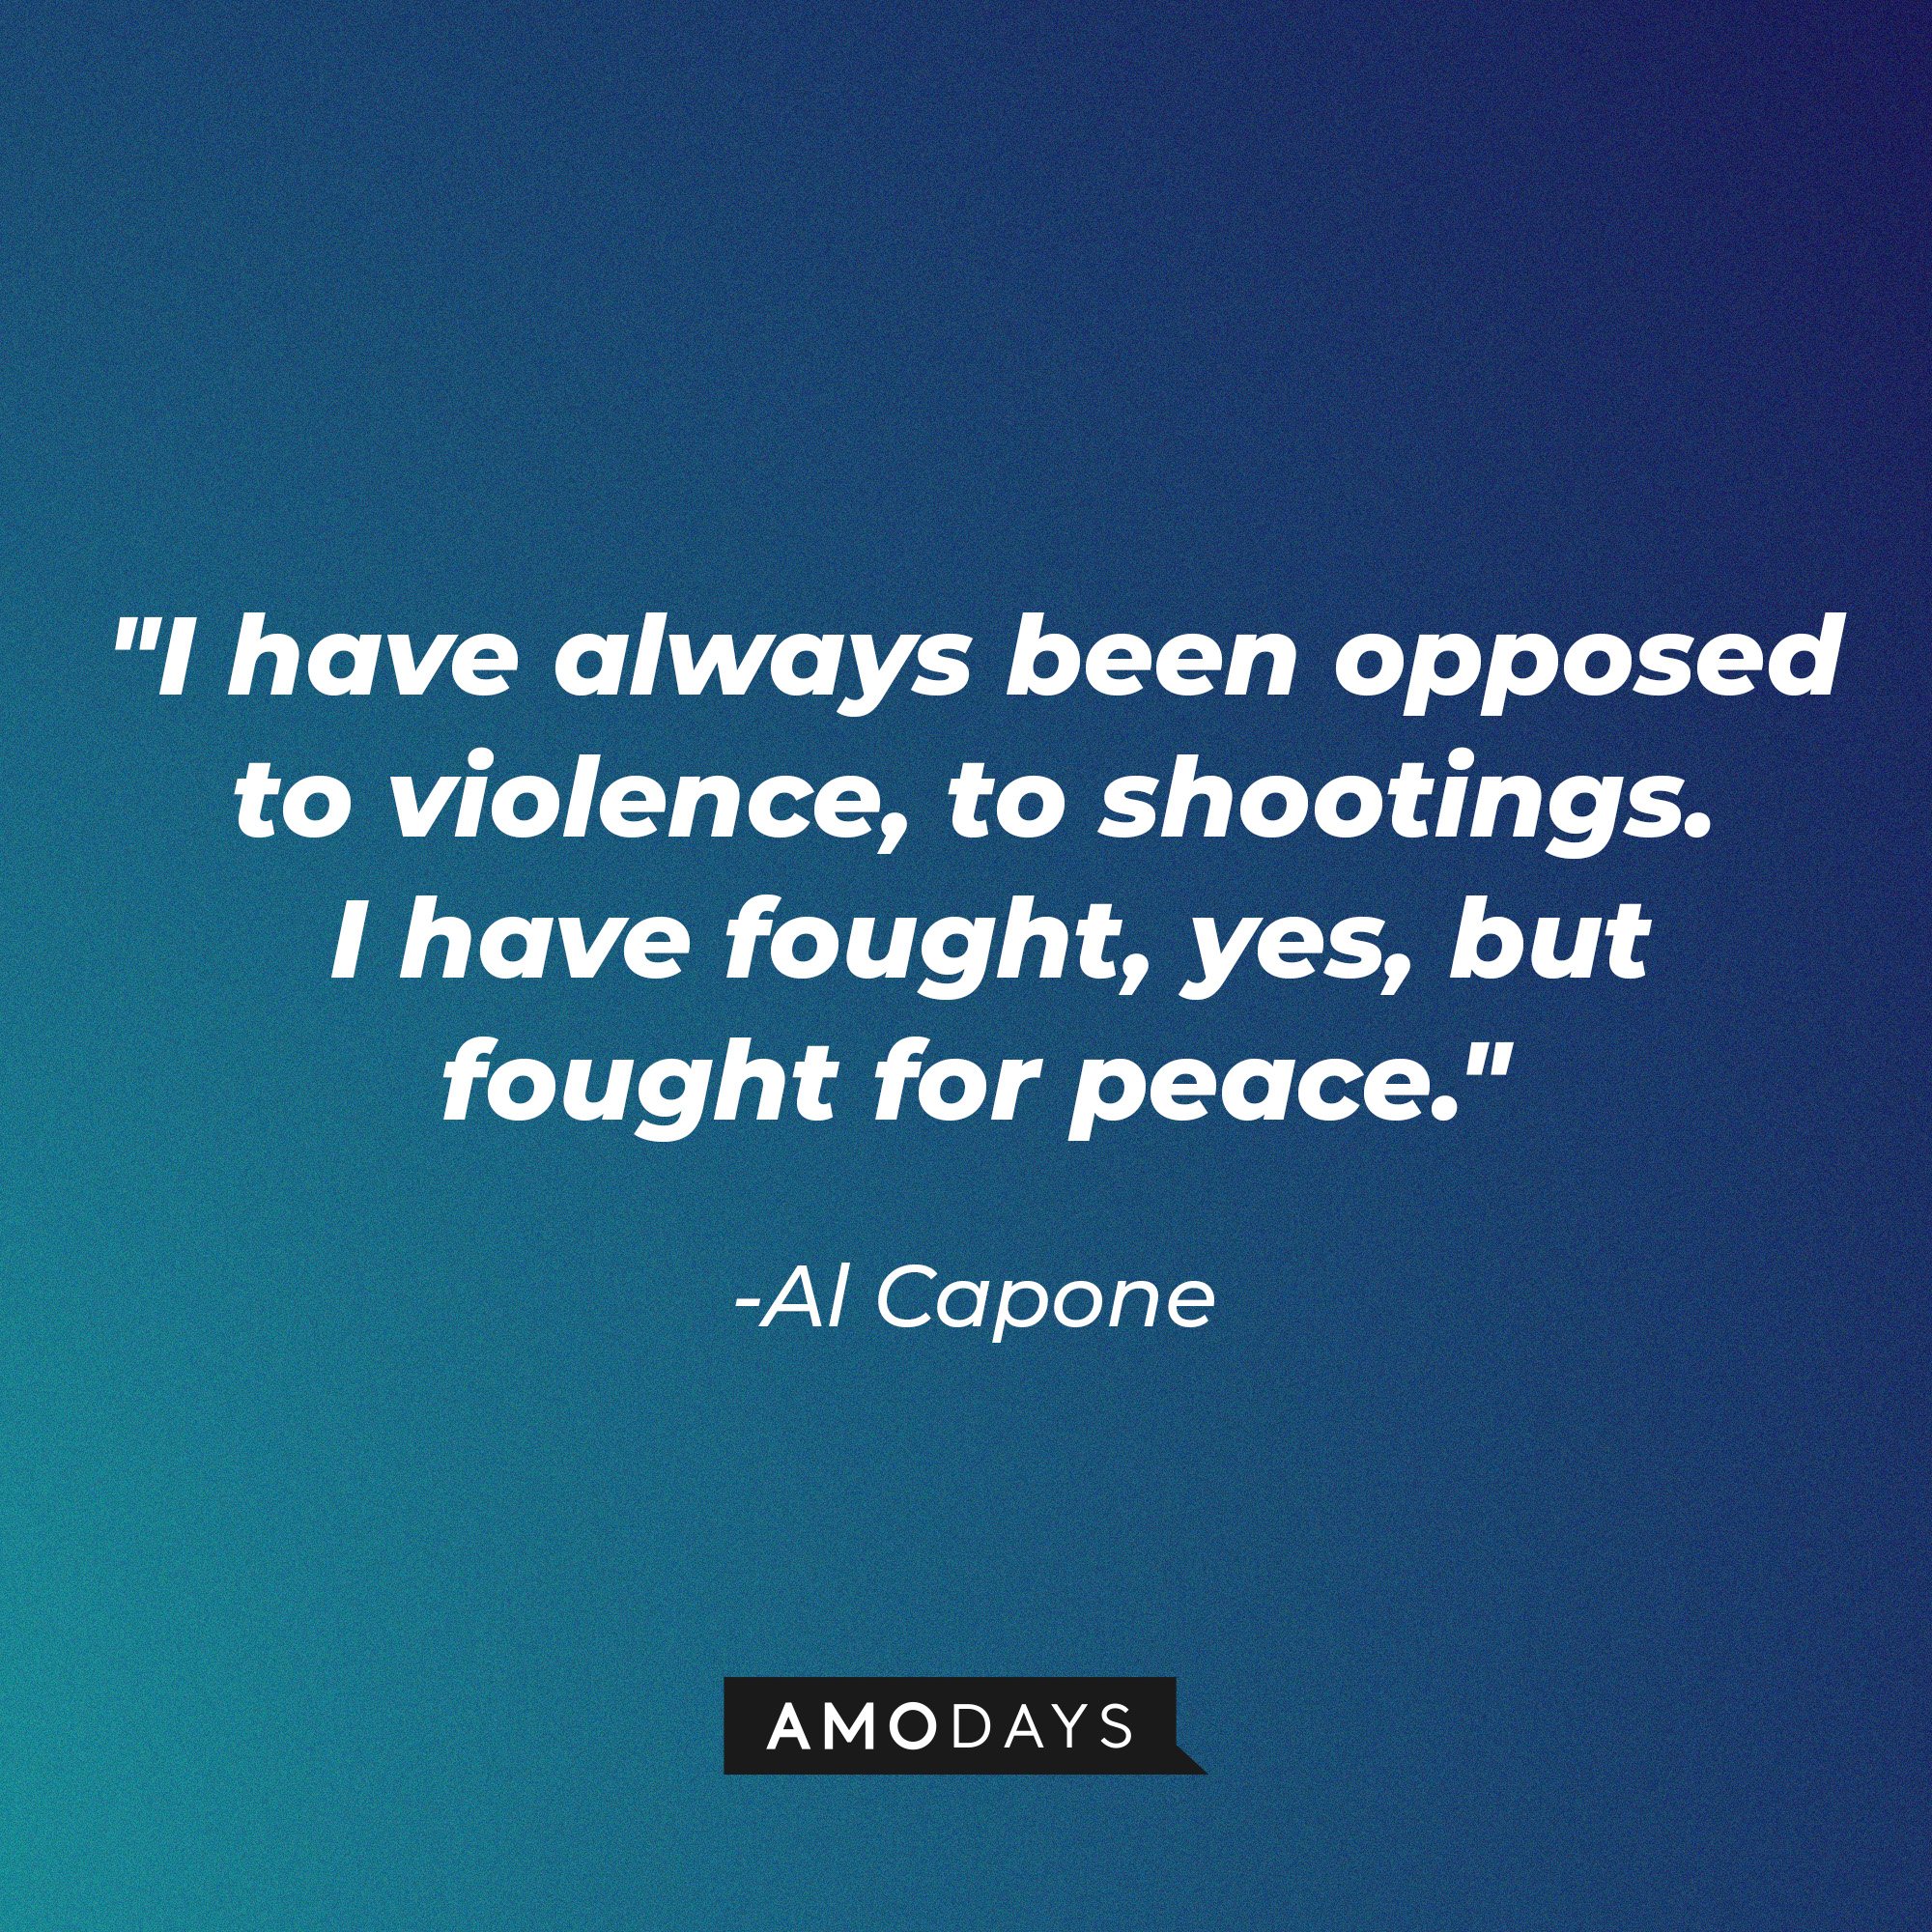 Al Capone’s quote: "I have always been opposed to violence, to shootings. I have fought, yes, but fought for peace." | Image: AmoDays